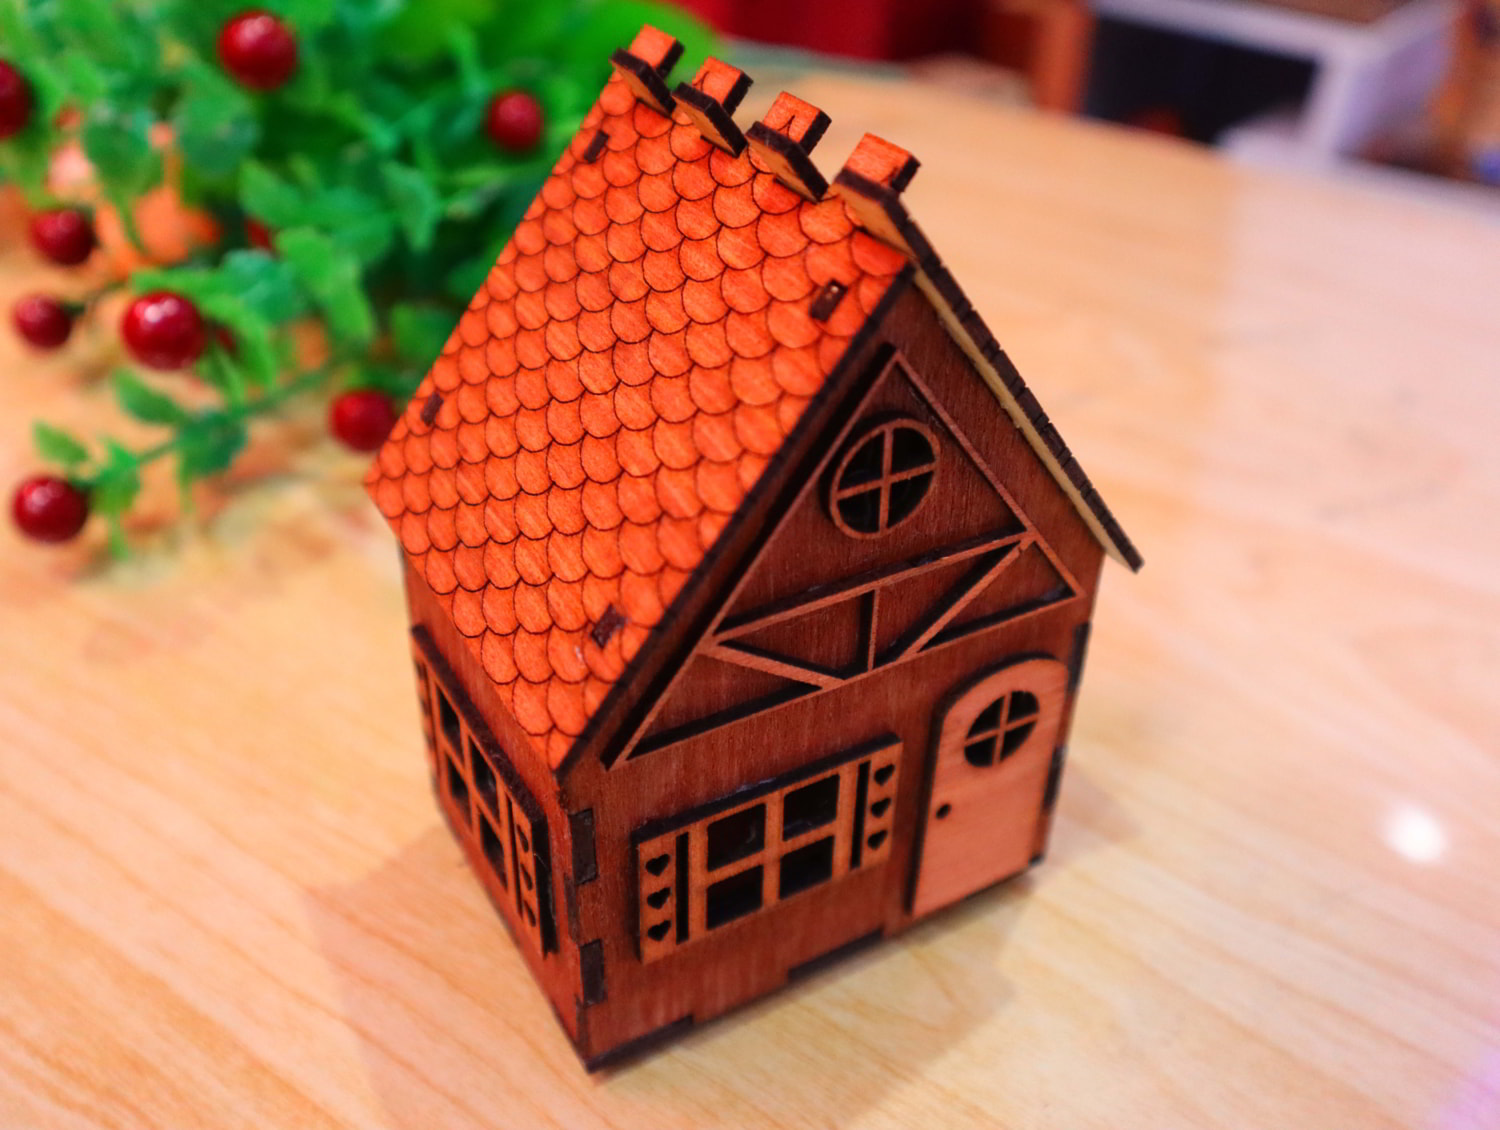 Laser Cut House 3mm Free Vector